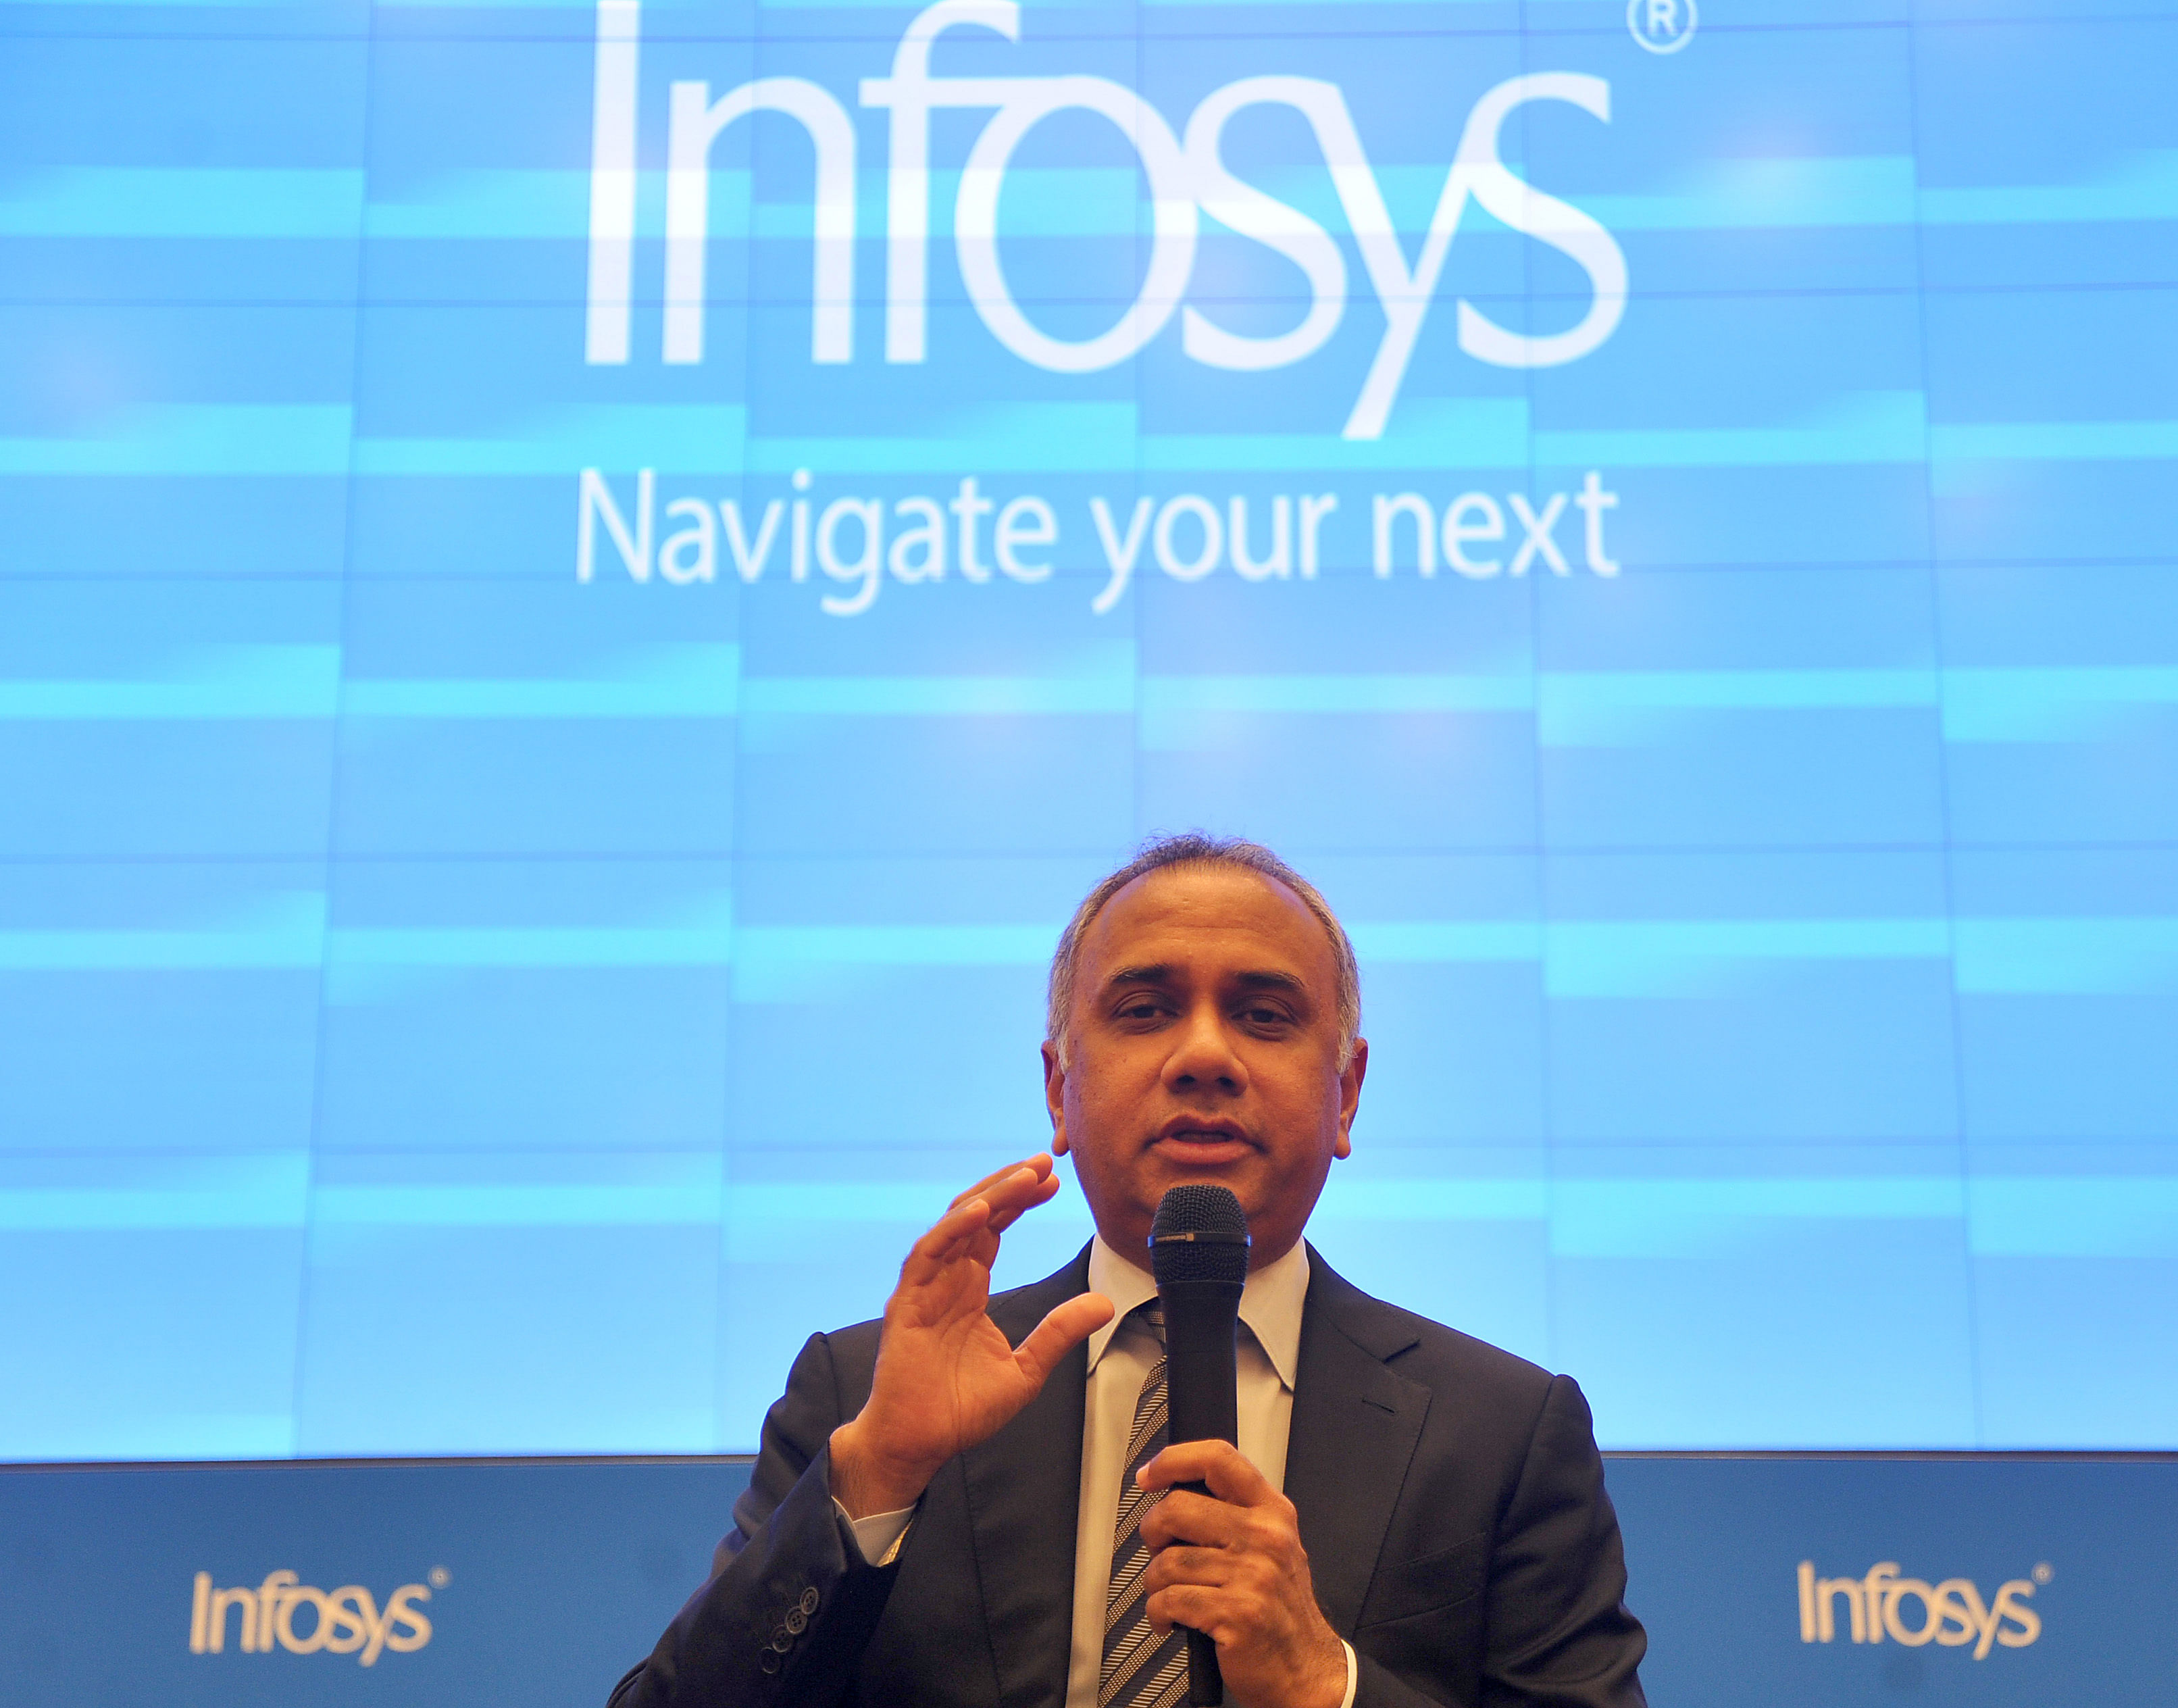 Infosys CEO and MD Salil Parekh. (DH Photo)